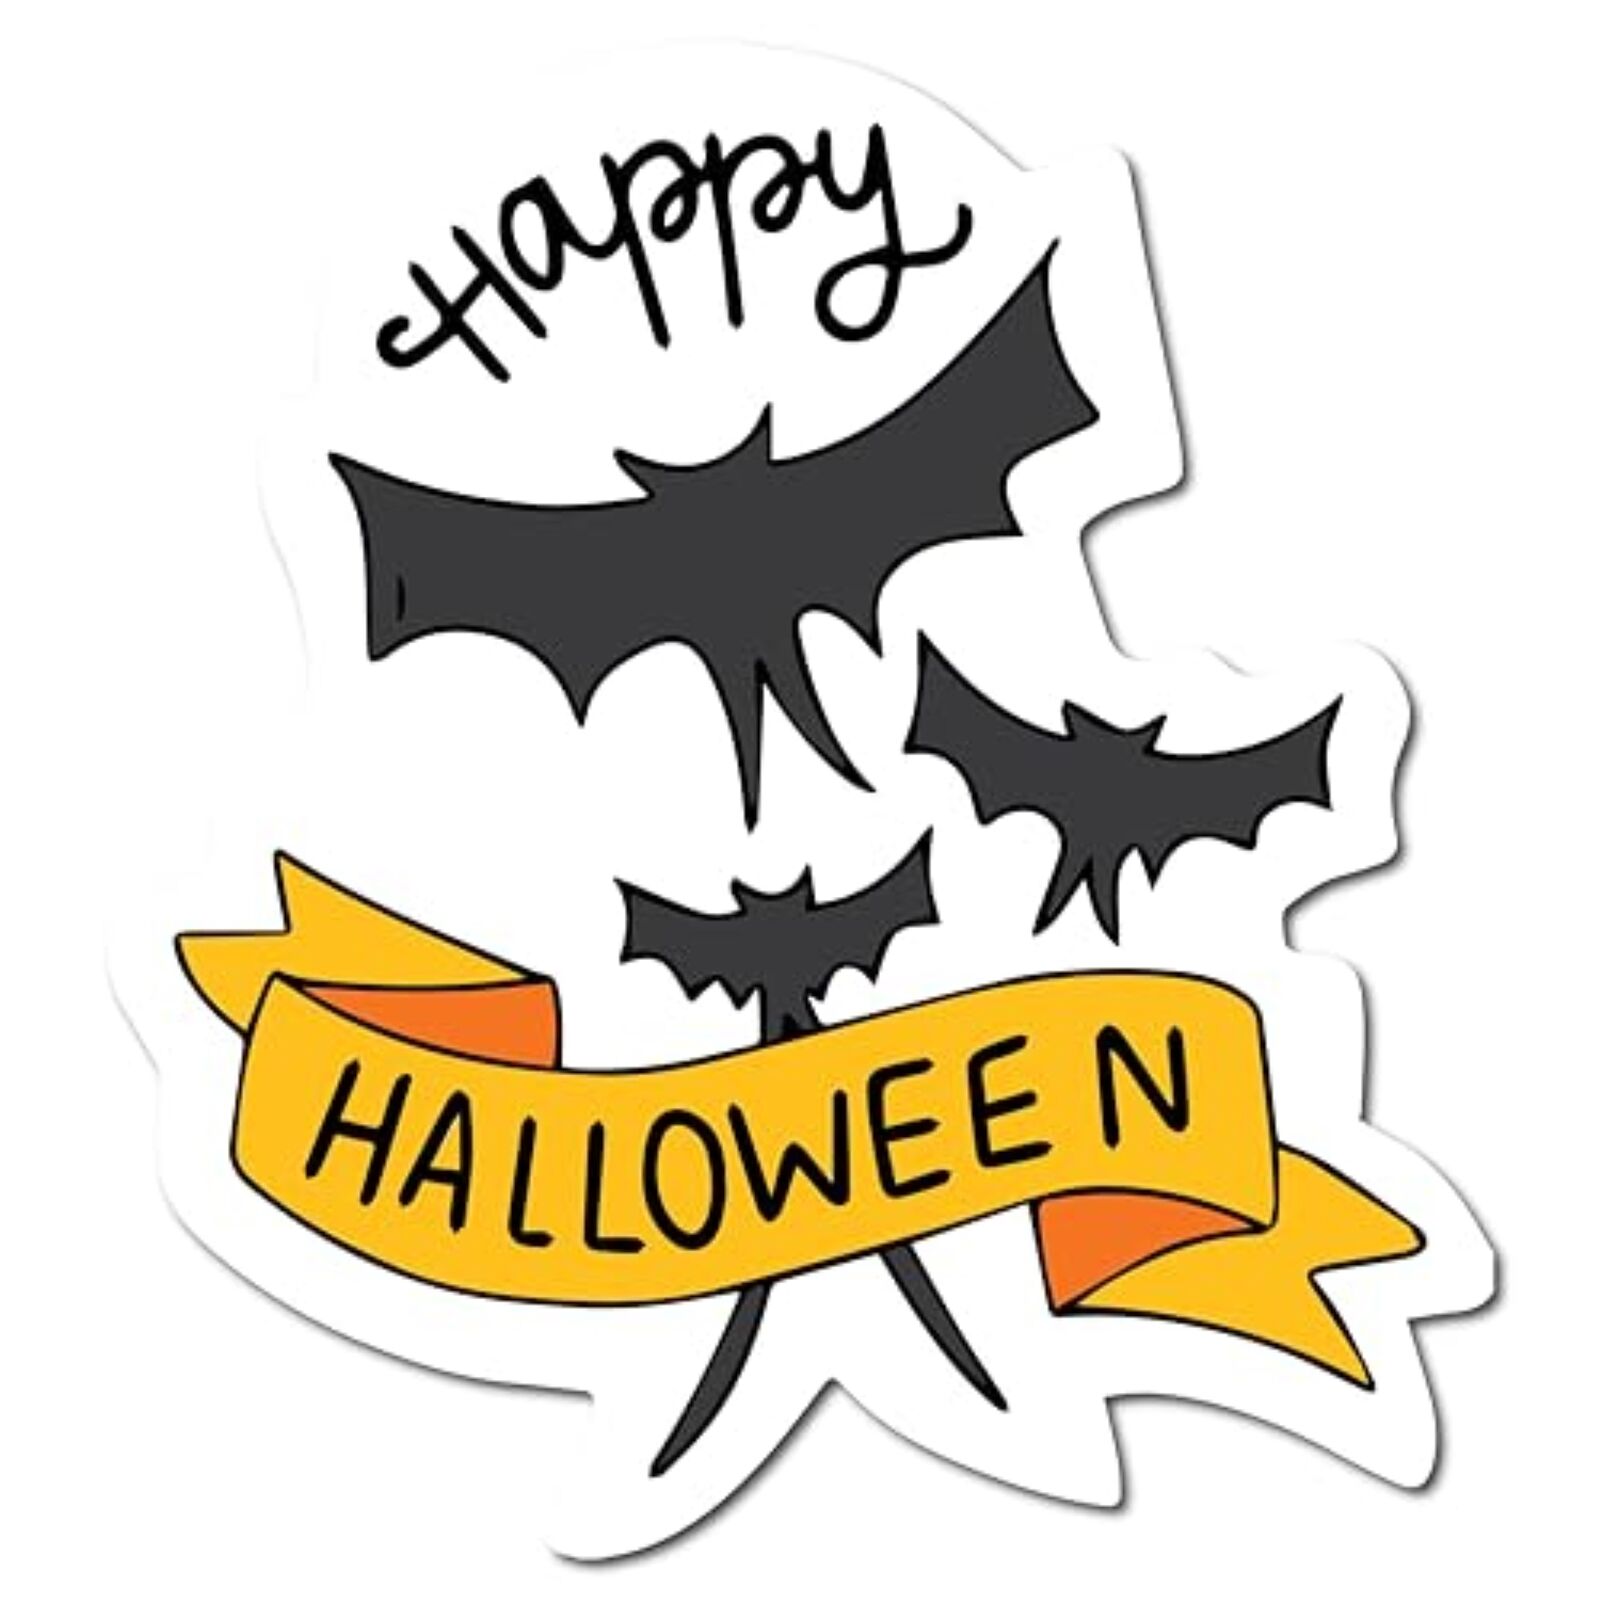 Happy Halloween Spooky Holiday Magnet Decal, 5x5 Inches, Automotive Magnet